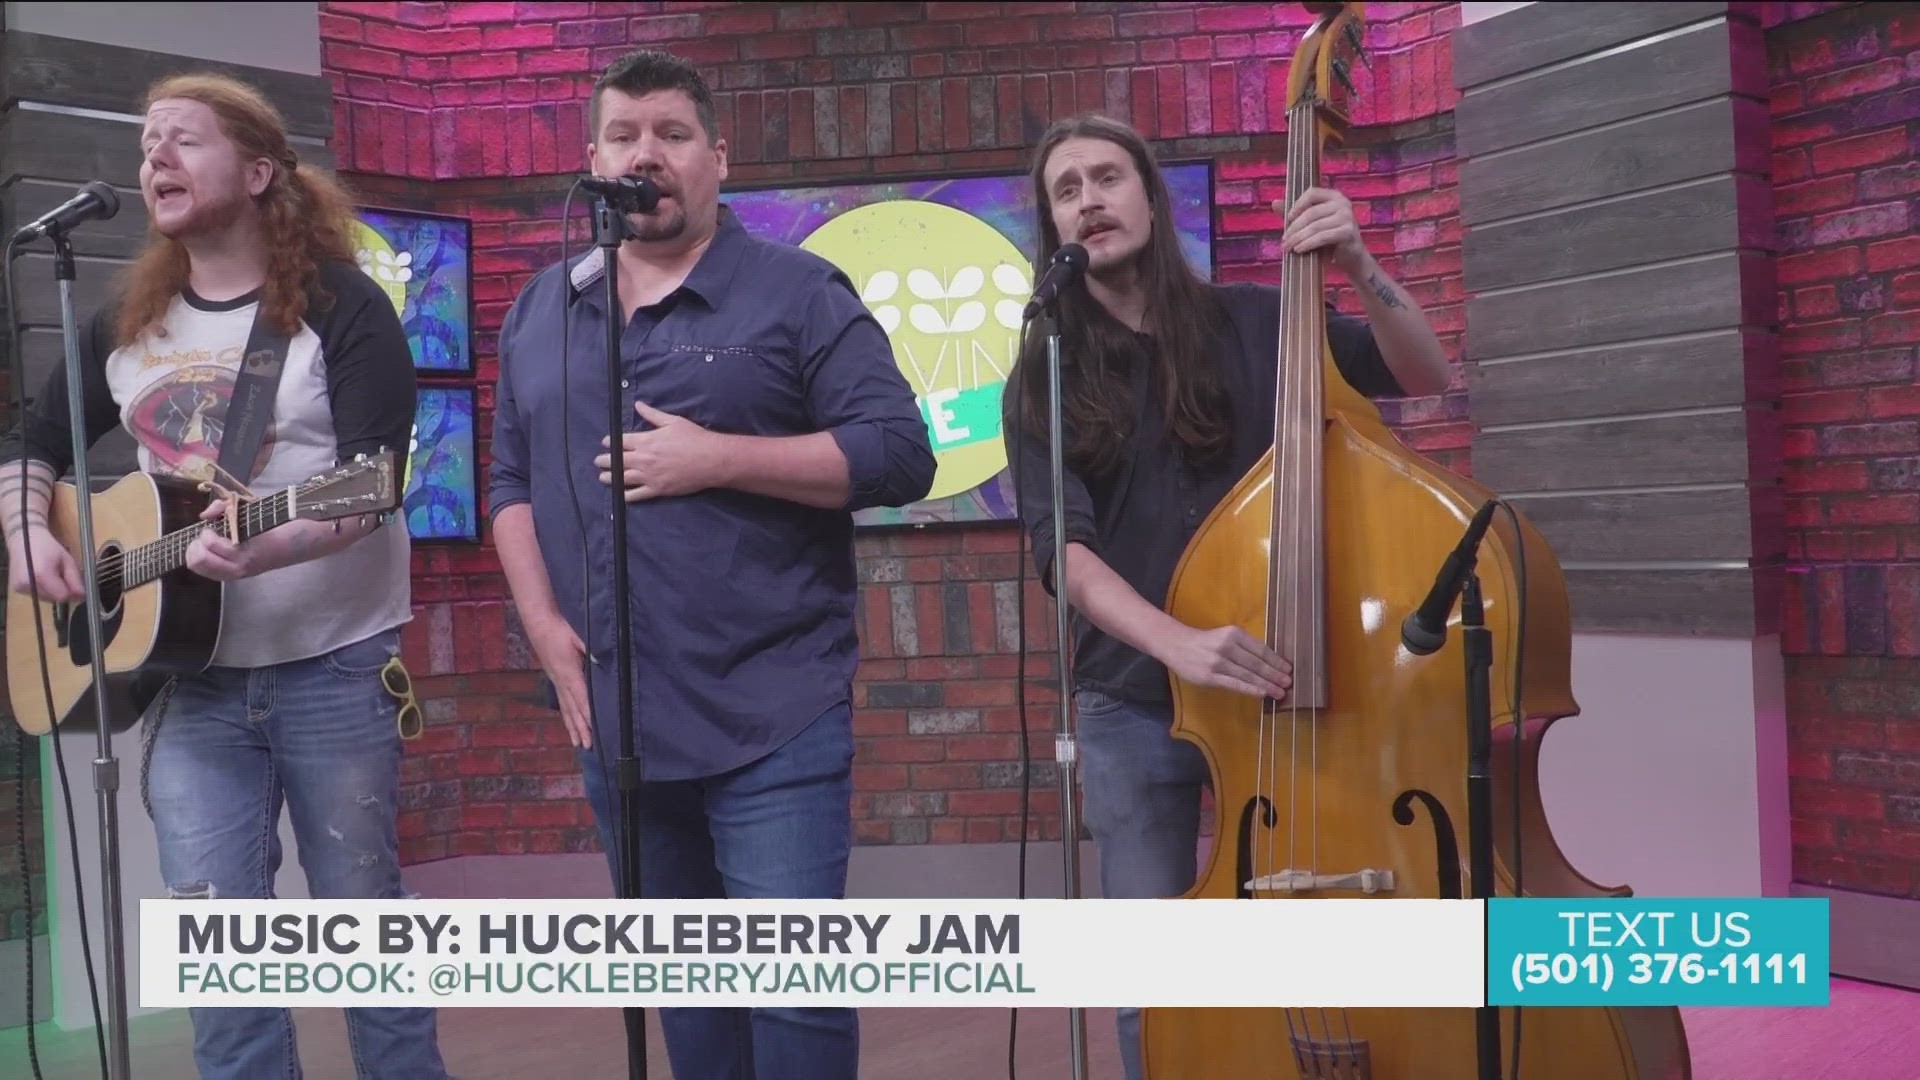 With new music and big performances, Huckleberry Jam has been busy! They tell us all about it and jam out in the studio.